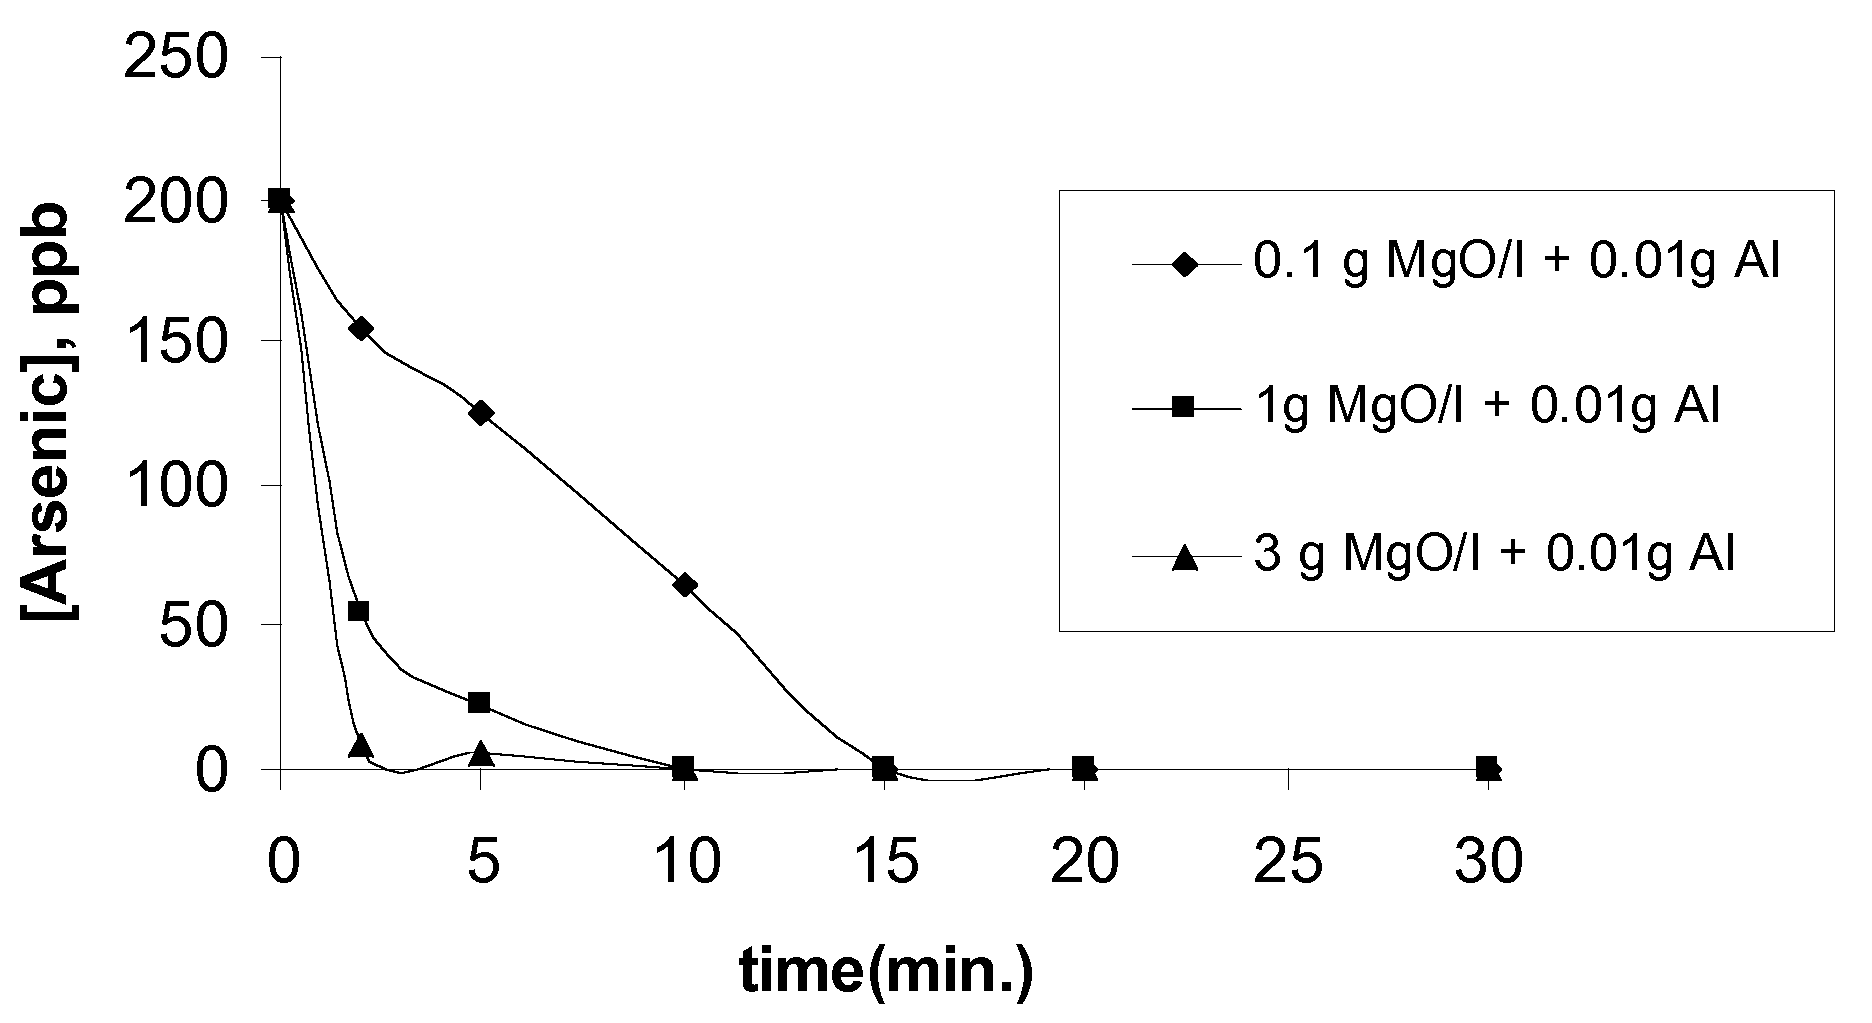 Use of MgO doped with a divalent or trivalent metal cation for removing arsenic from water